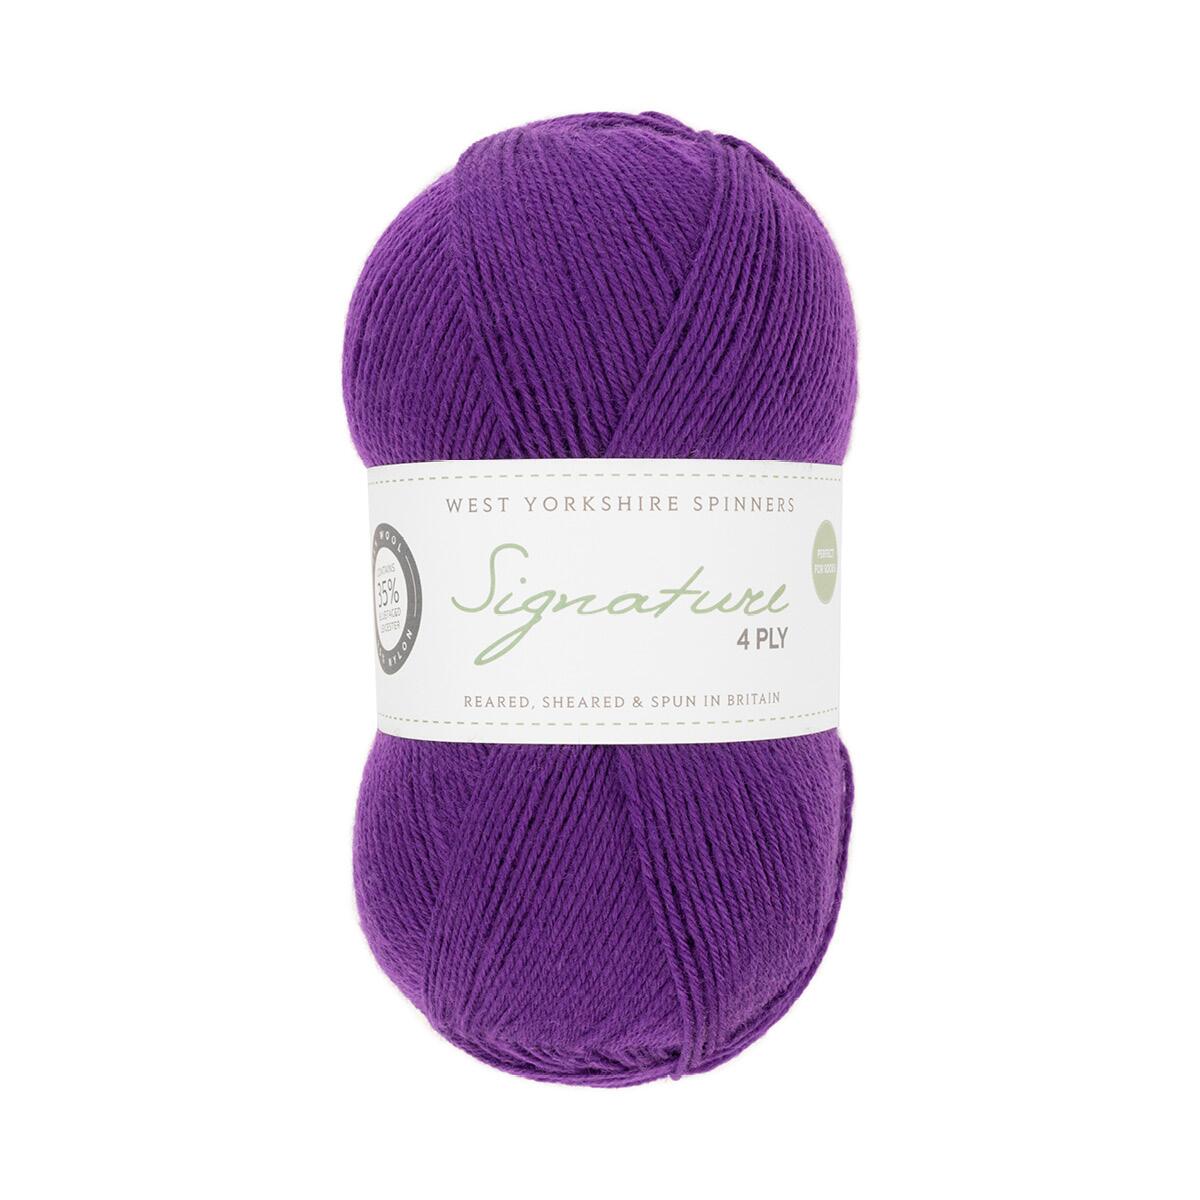 West Yorkshire Spinners Signature 4ply Unis 100g Farbe: 1003 Amethyst